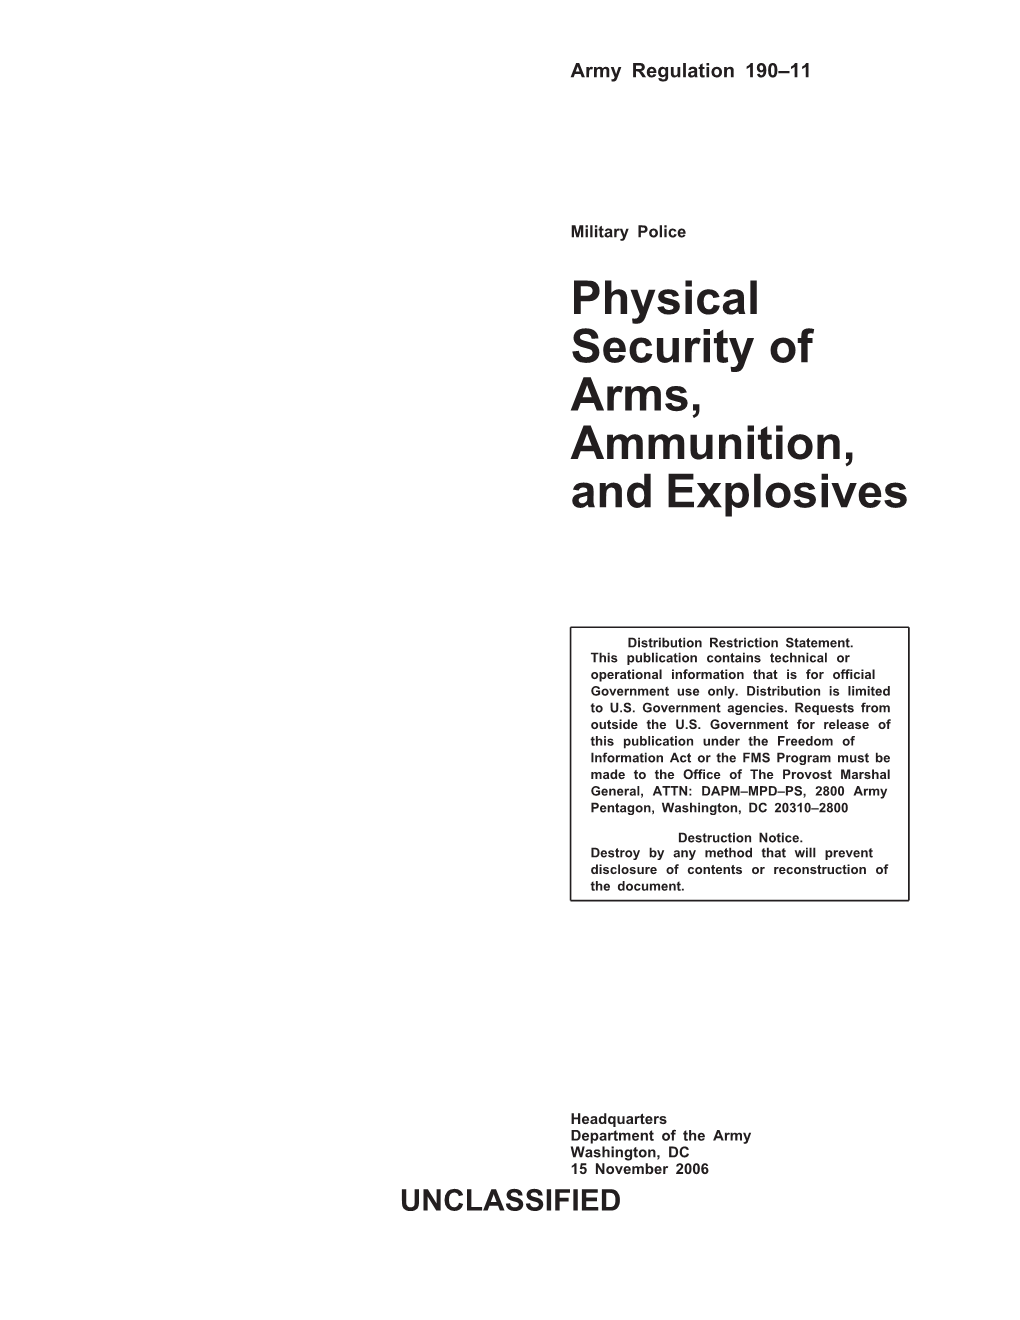 Physical Security of Arms, Ammunition, and Explosives